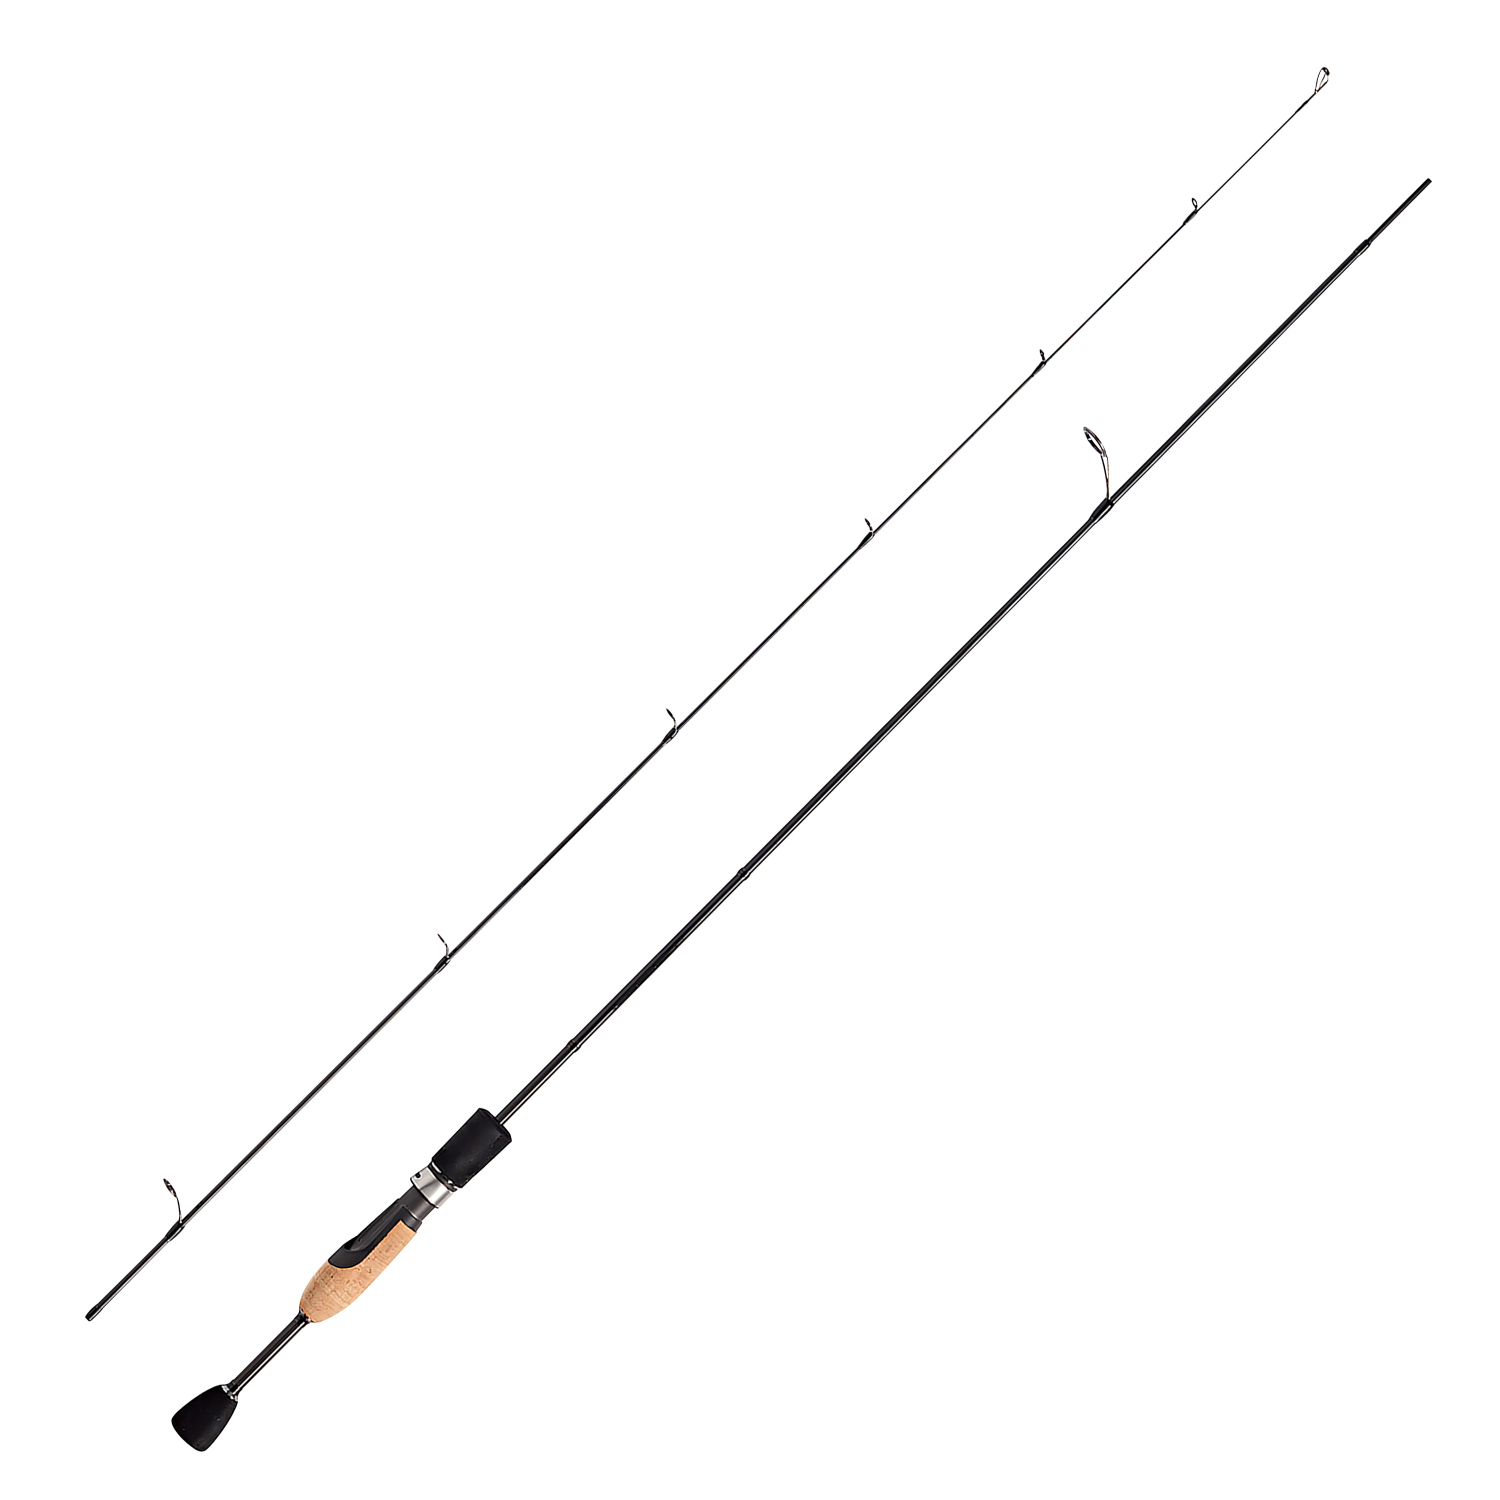 Kogha Spinning Rod Spooner Trout at low prices